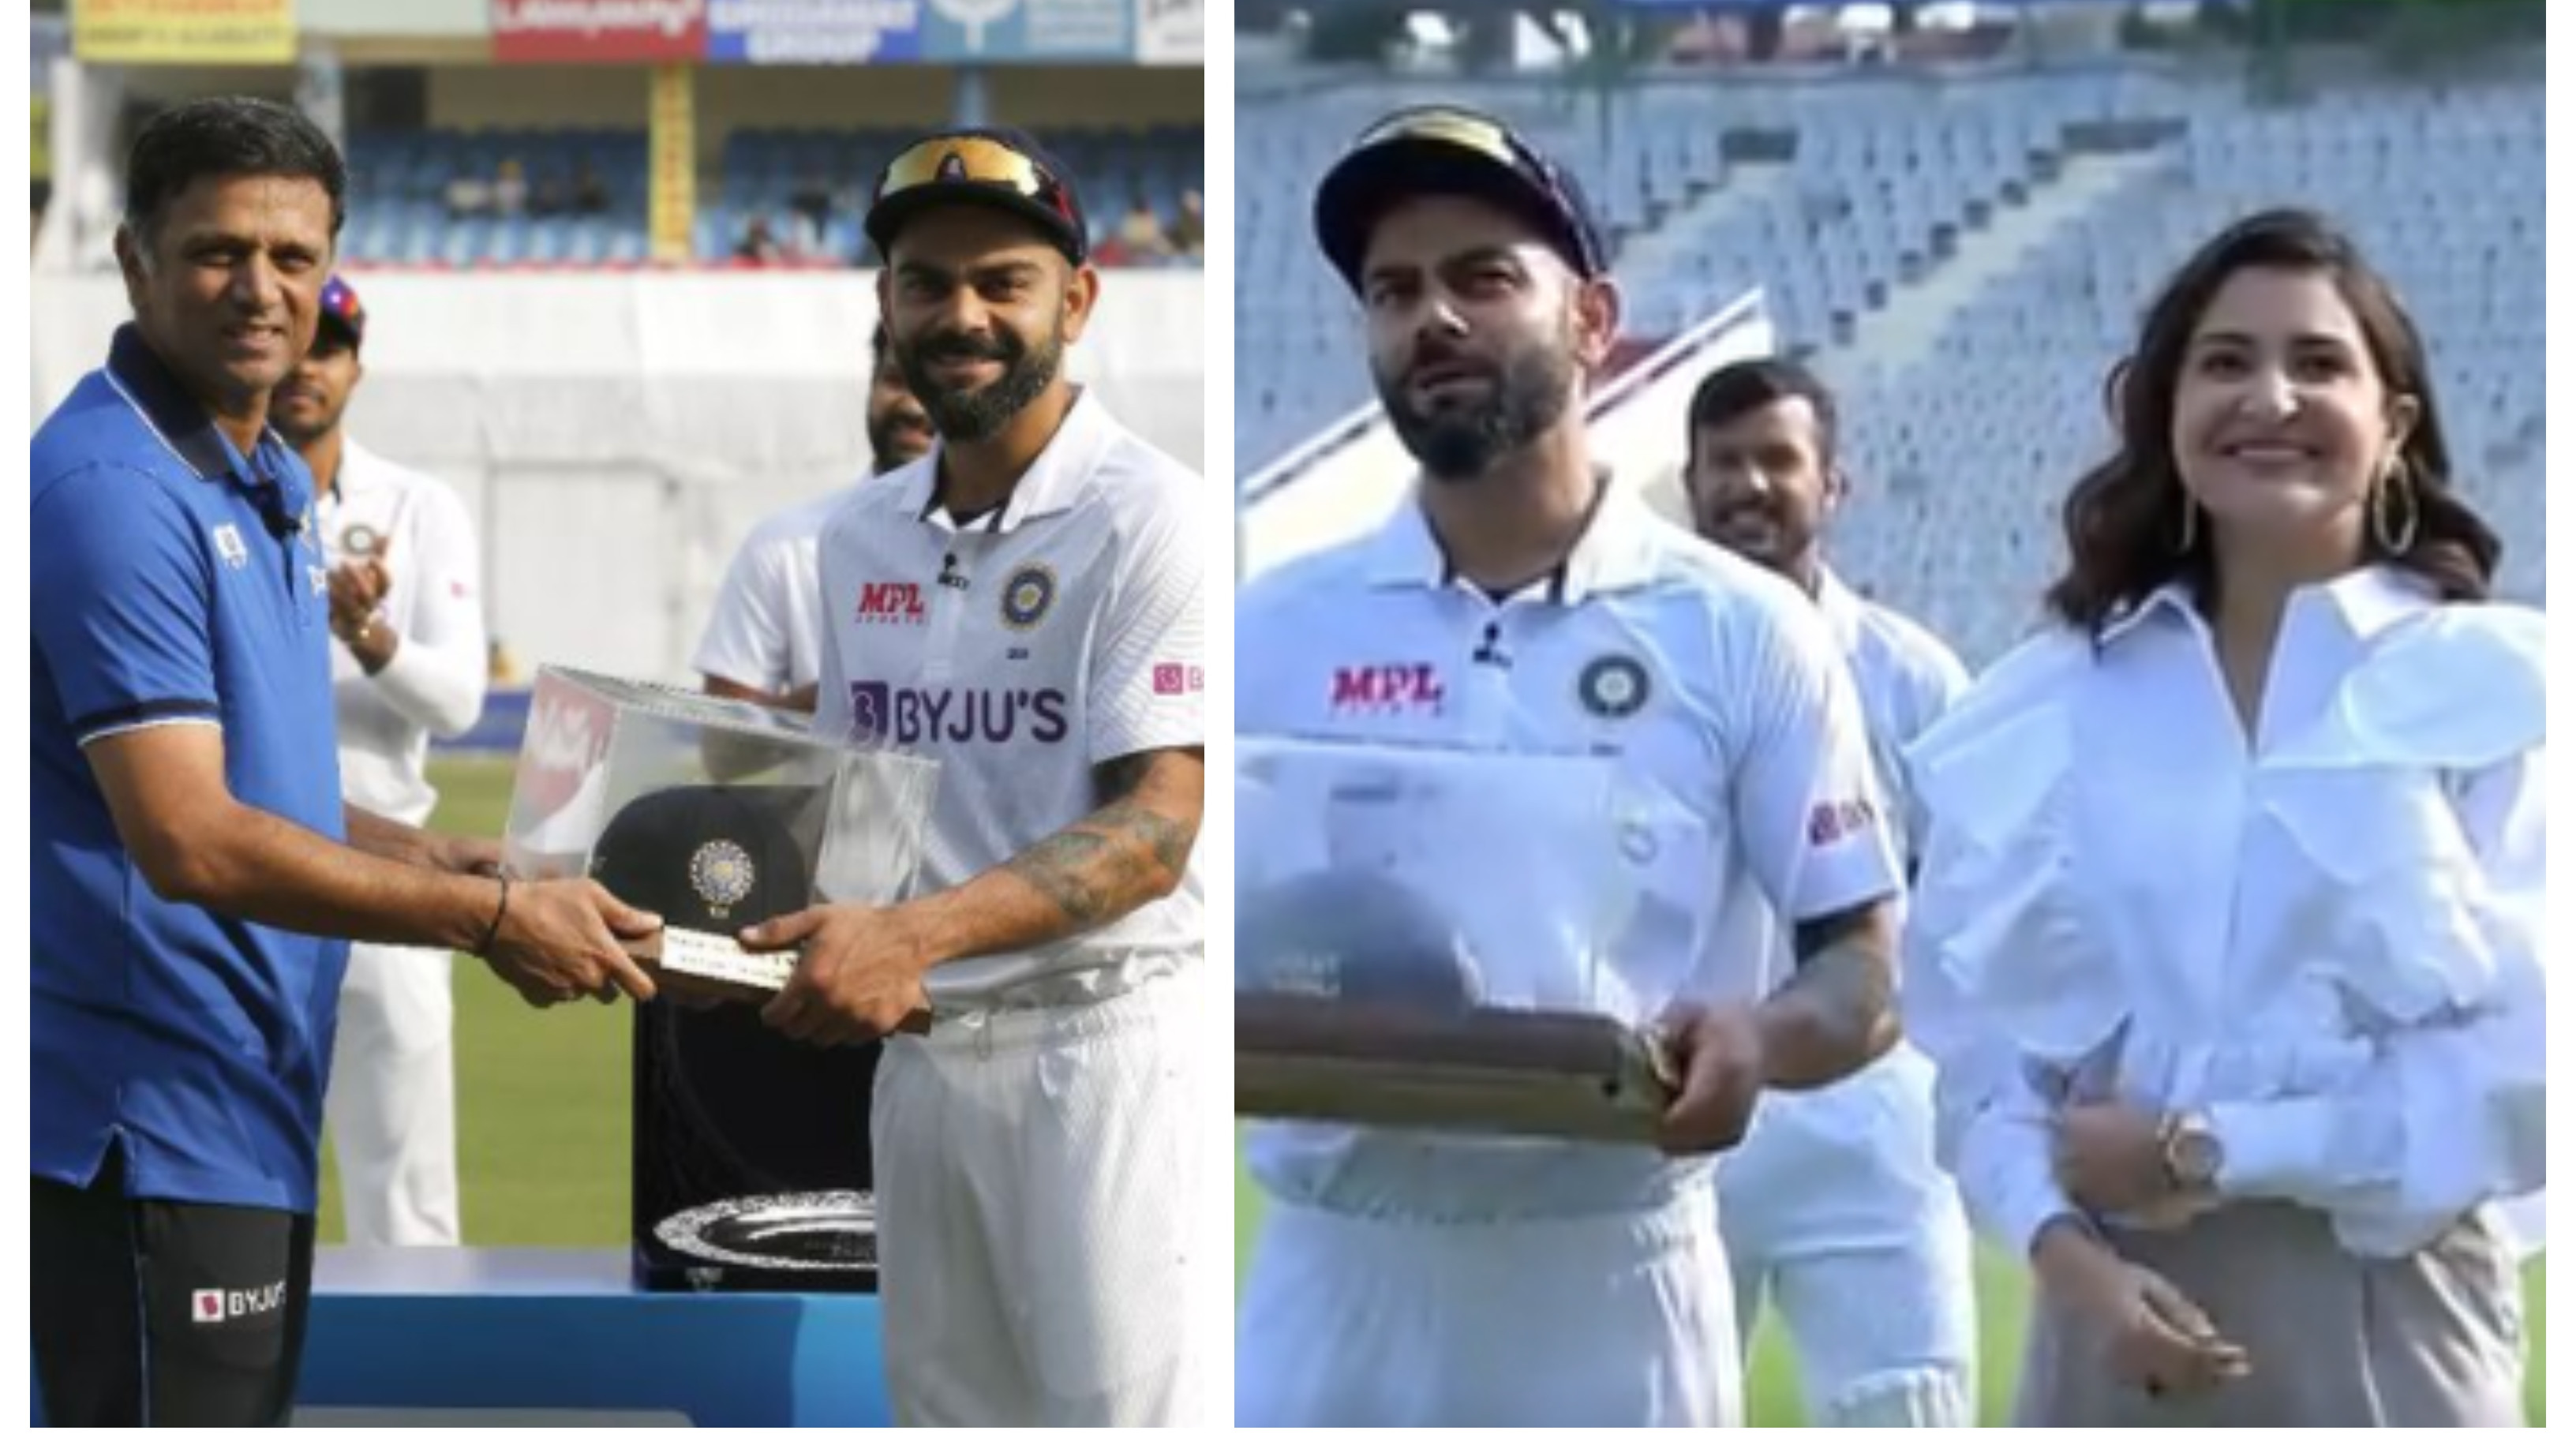 IND v SL 2022: WATCH – “It's well deserved, well earned”, Rahul Dravid presents 100th Test cap to Virat Kohli